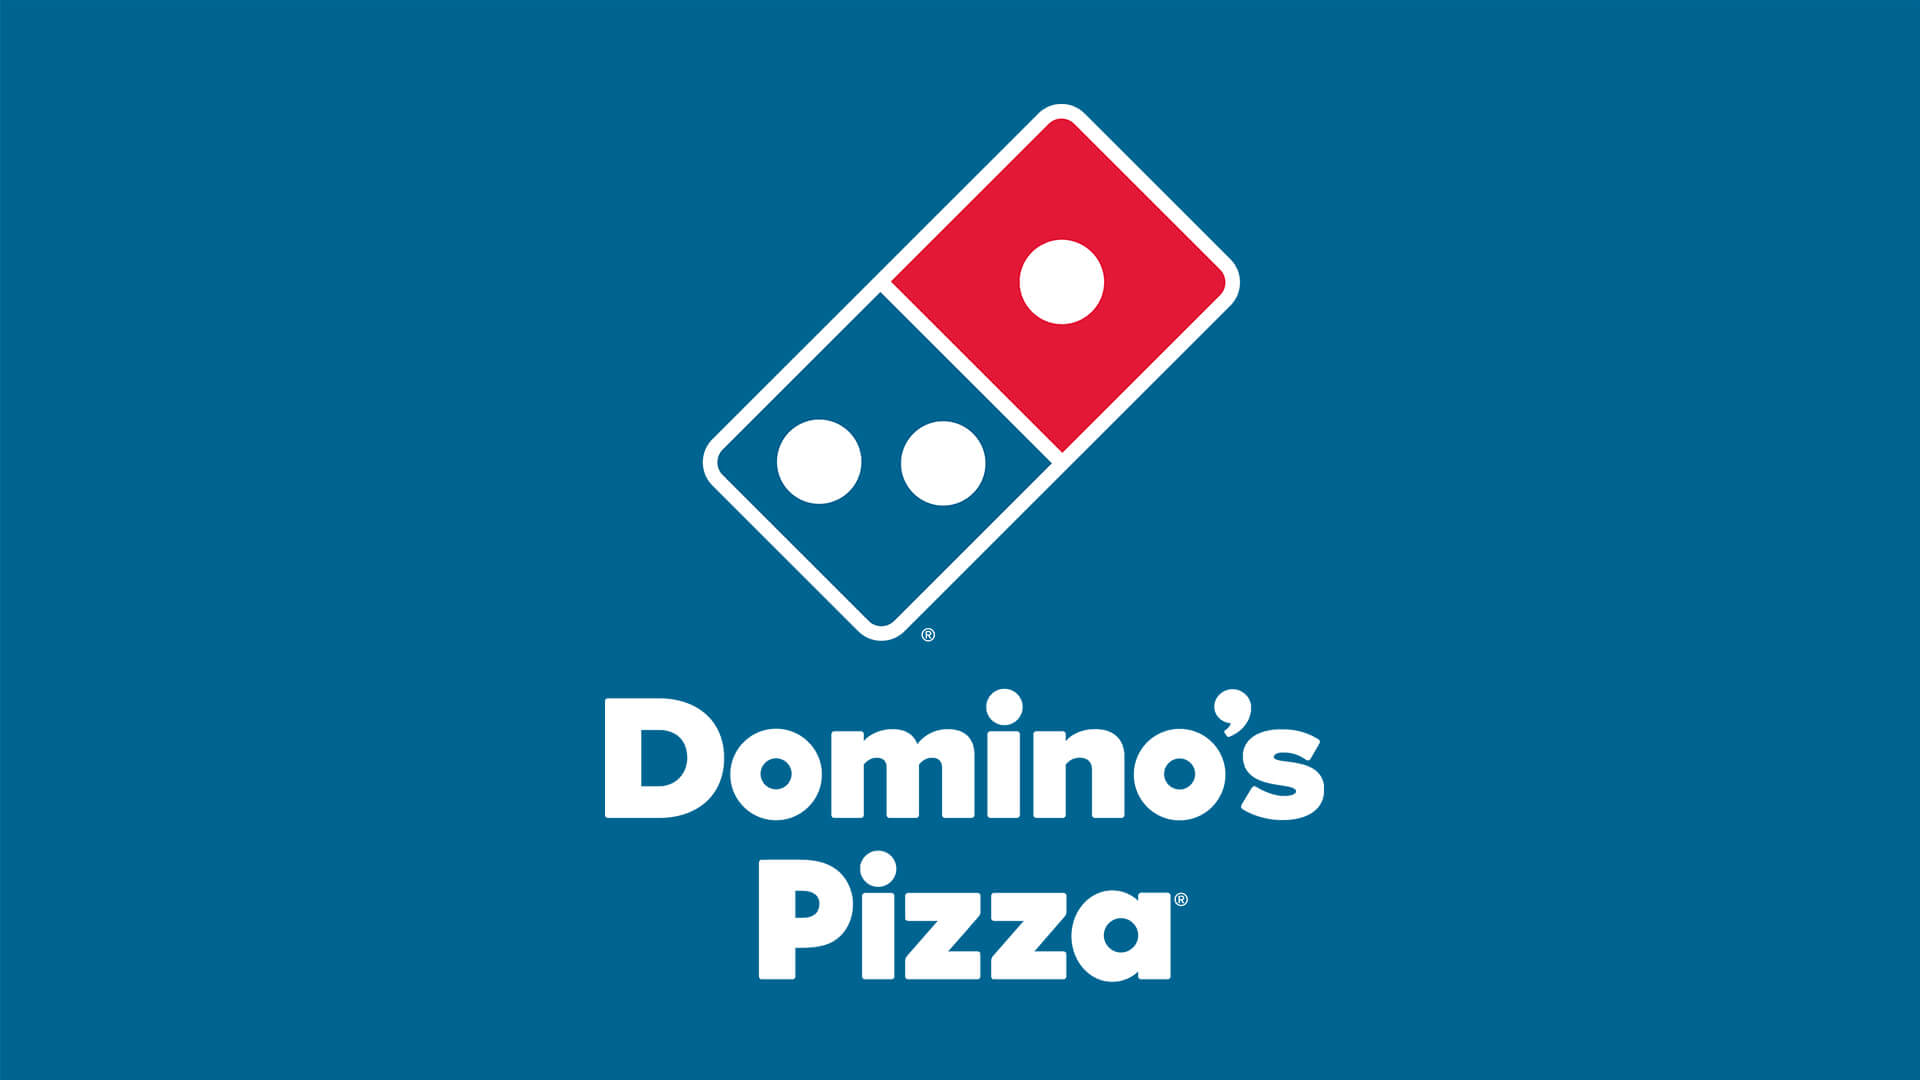 Dominos Pizza makes fun of Microsoft and Halo Infinite Lets